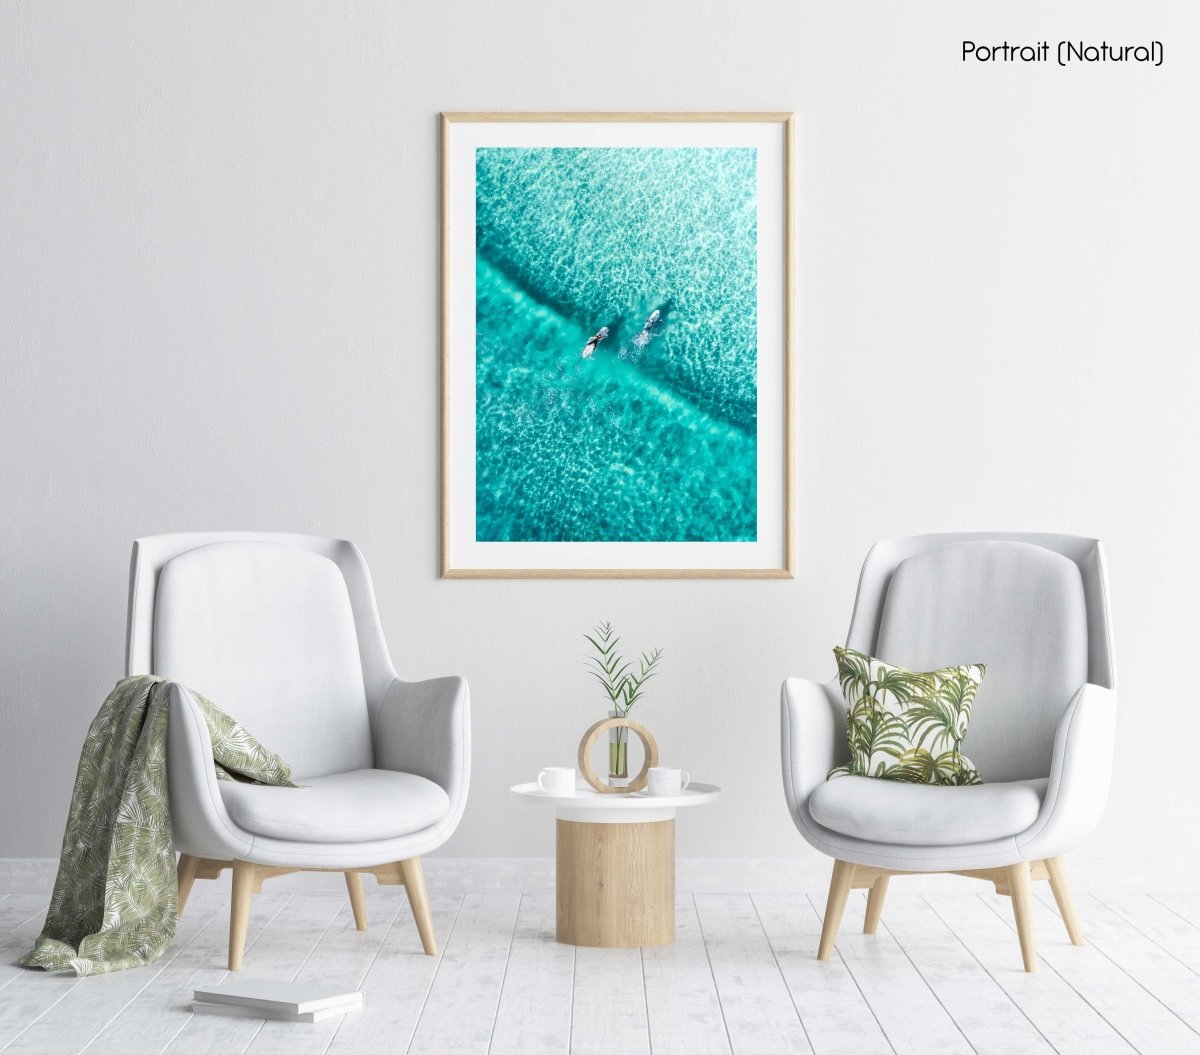 Two surfers paddling on one blue wave from aerial view in a natural fine art frame